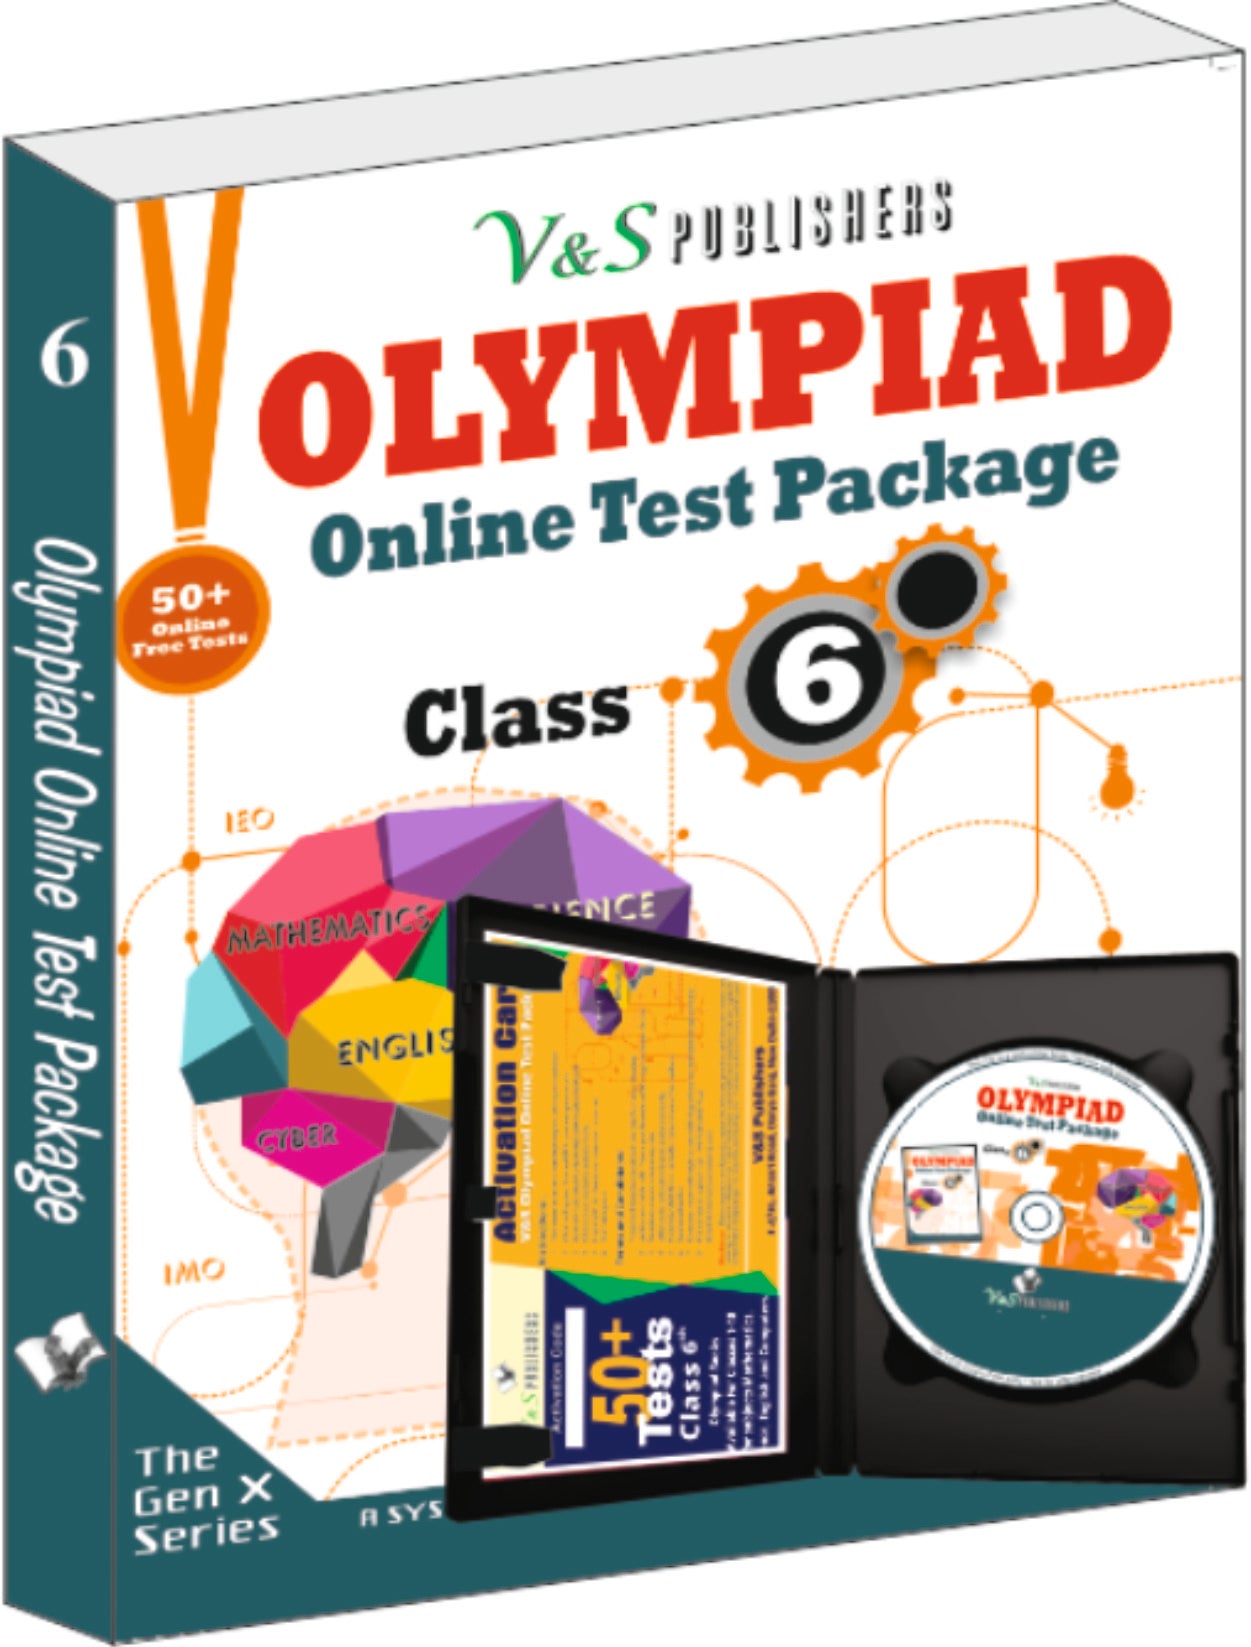 Olympiad Online Test Package Class 6 (Free CD With Activation Voucher)